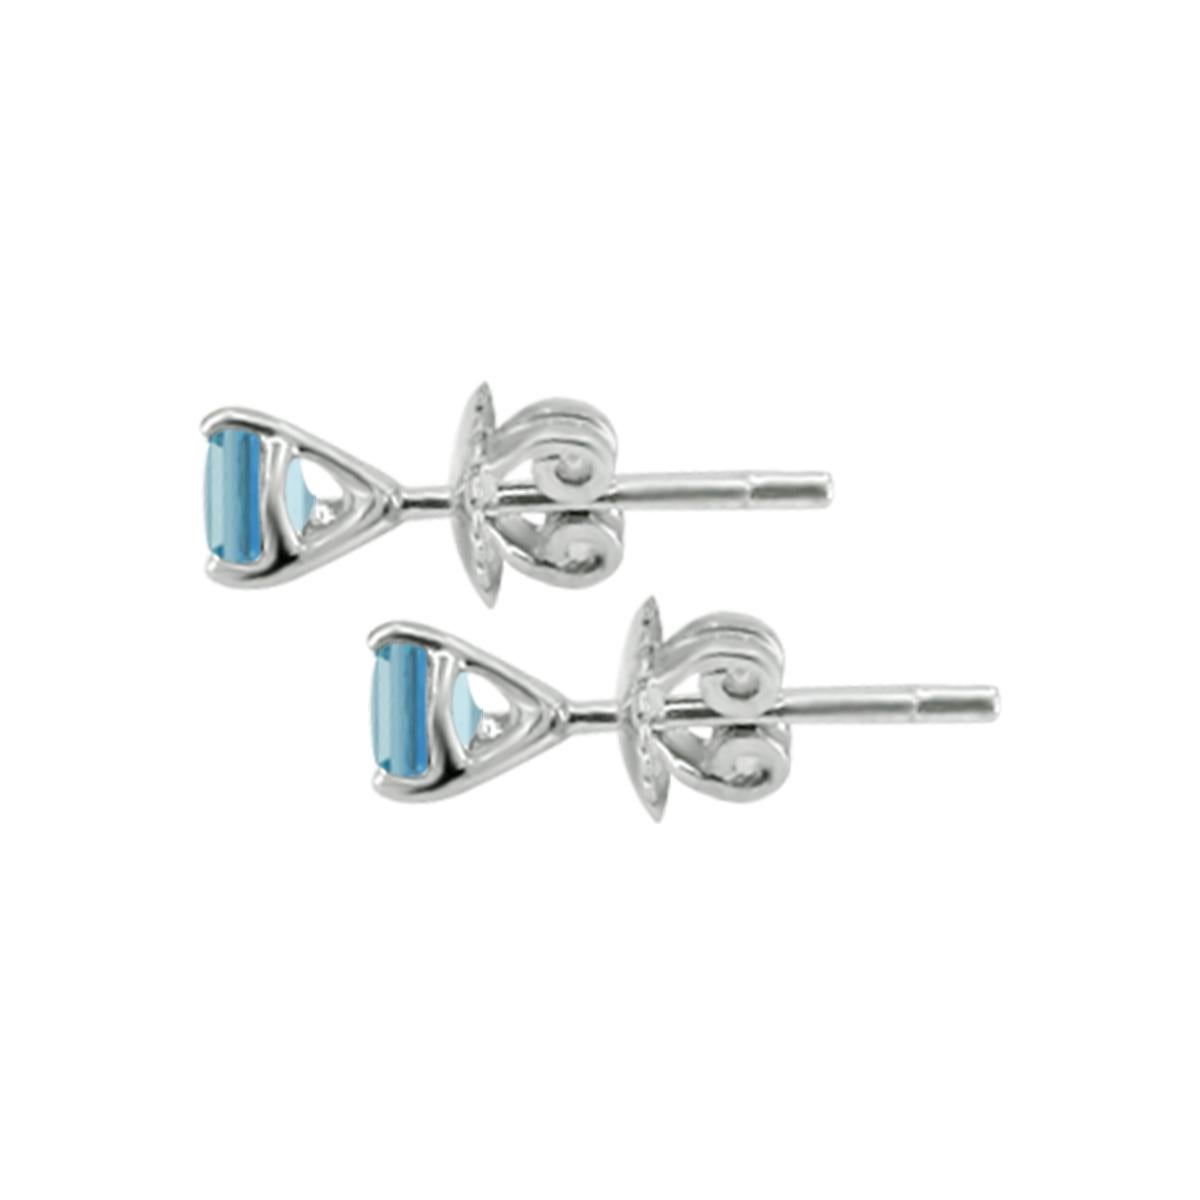 A Very Alluring Round Shaped 14K White Gold Stud Earring In A Aqua-Blue For A Surprising Variation. 
This Beautiful Earring Has A Timeless Beauty And Elegant Appeal.
The Minimalistic Design Of These 7mm Aquamarine Round Stud Earring Makes It